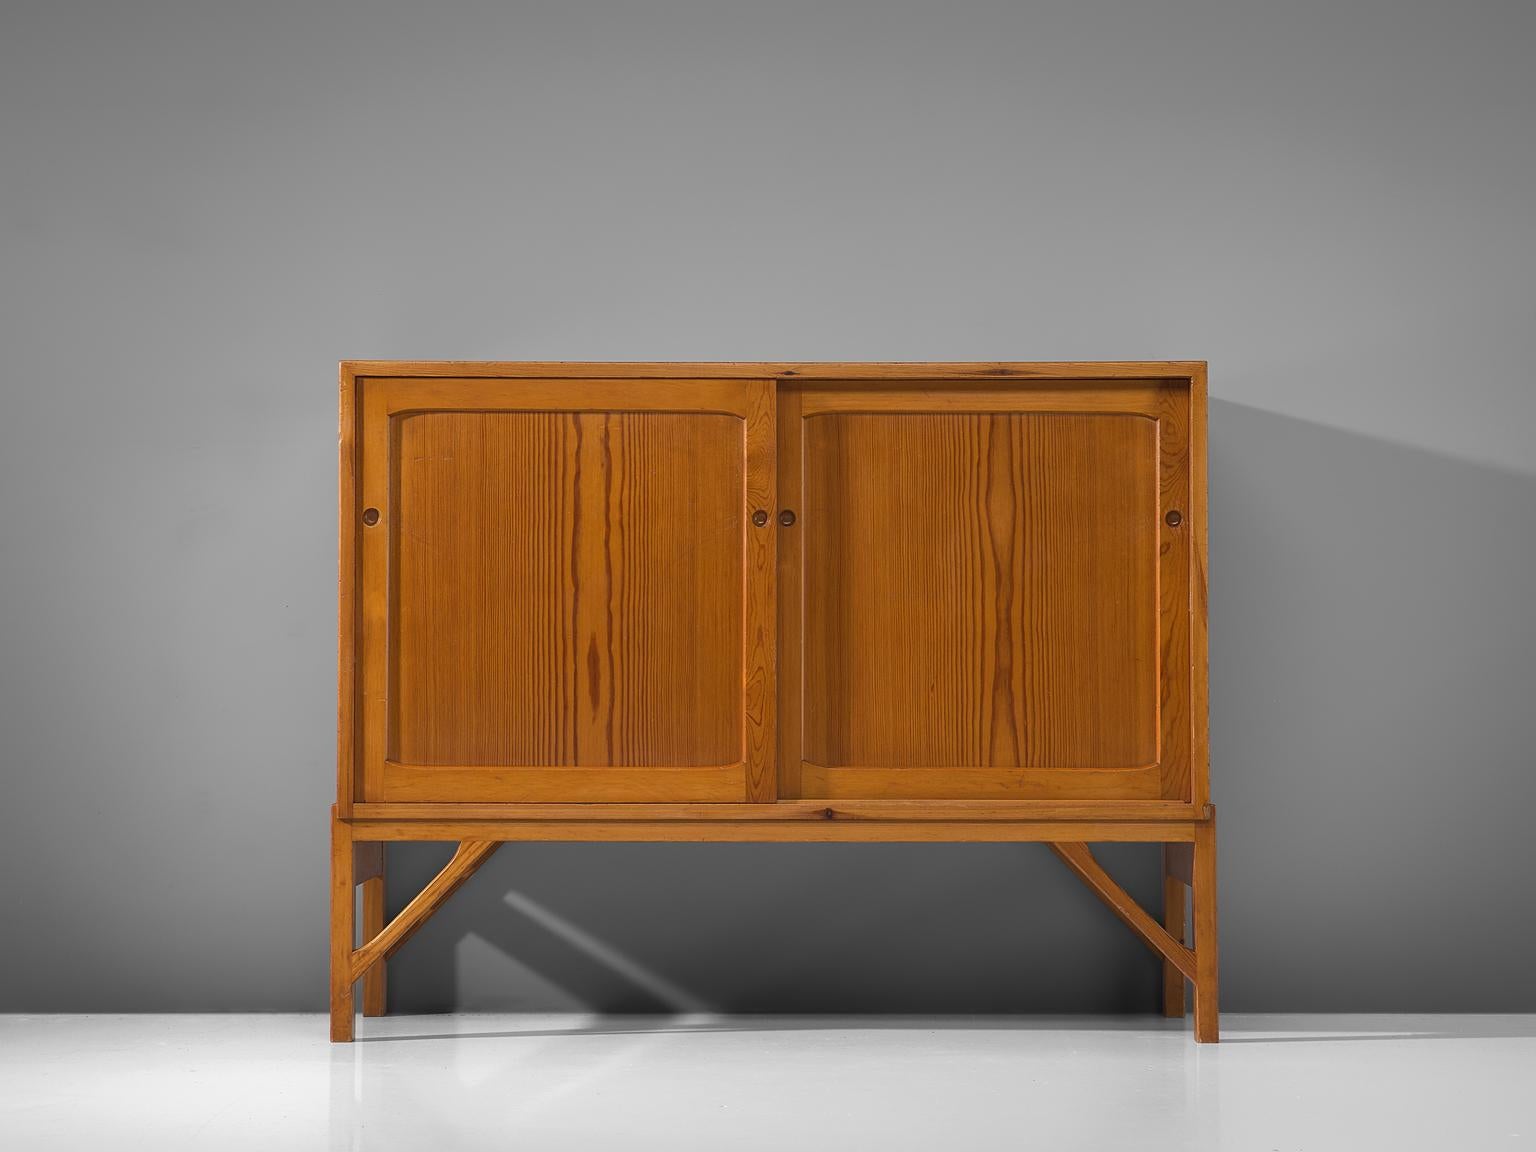 Børge Mogensen for FDB Møbler, cabinet, pine, Denmark, 1950s

Rustic sideboard with two sliding doors designed by Børge Mogensen. Constructive base which are a trademark of Mogensen. The fine vertical grain of the pinewood is visible on the front.